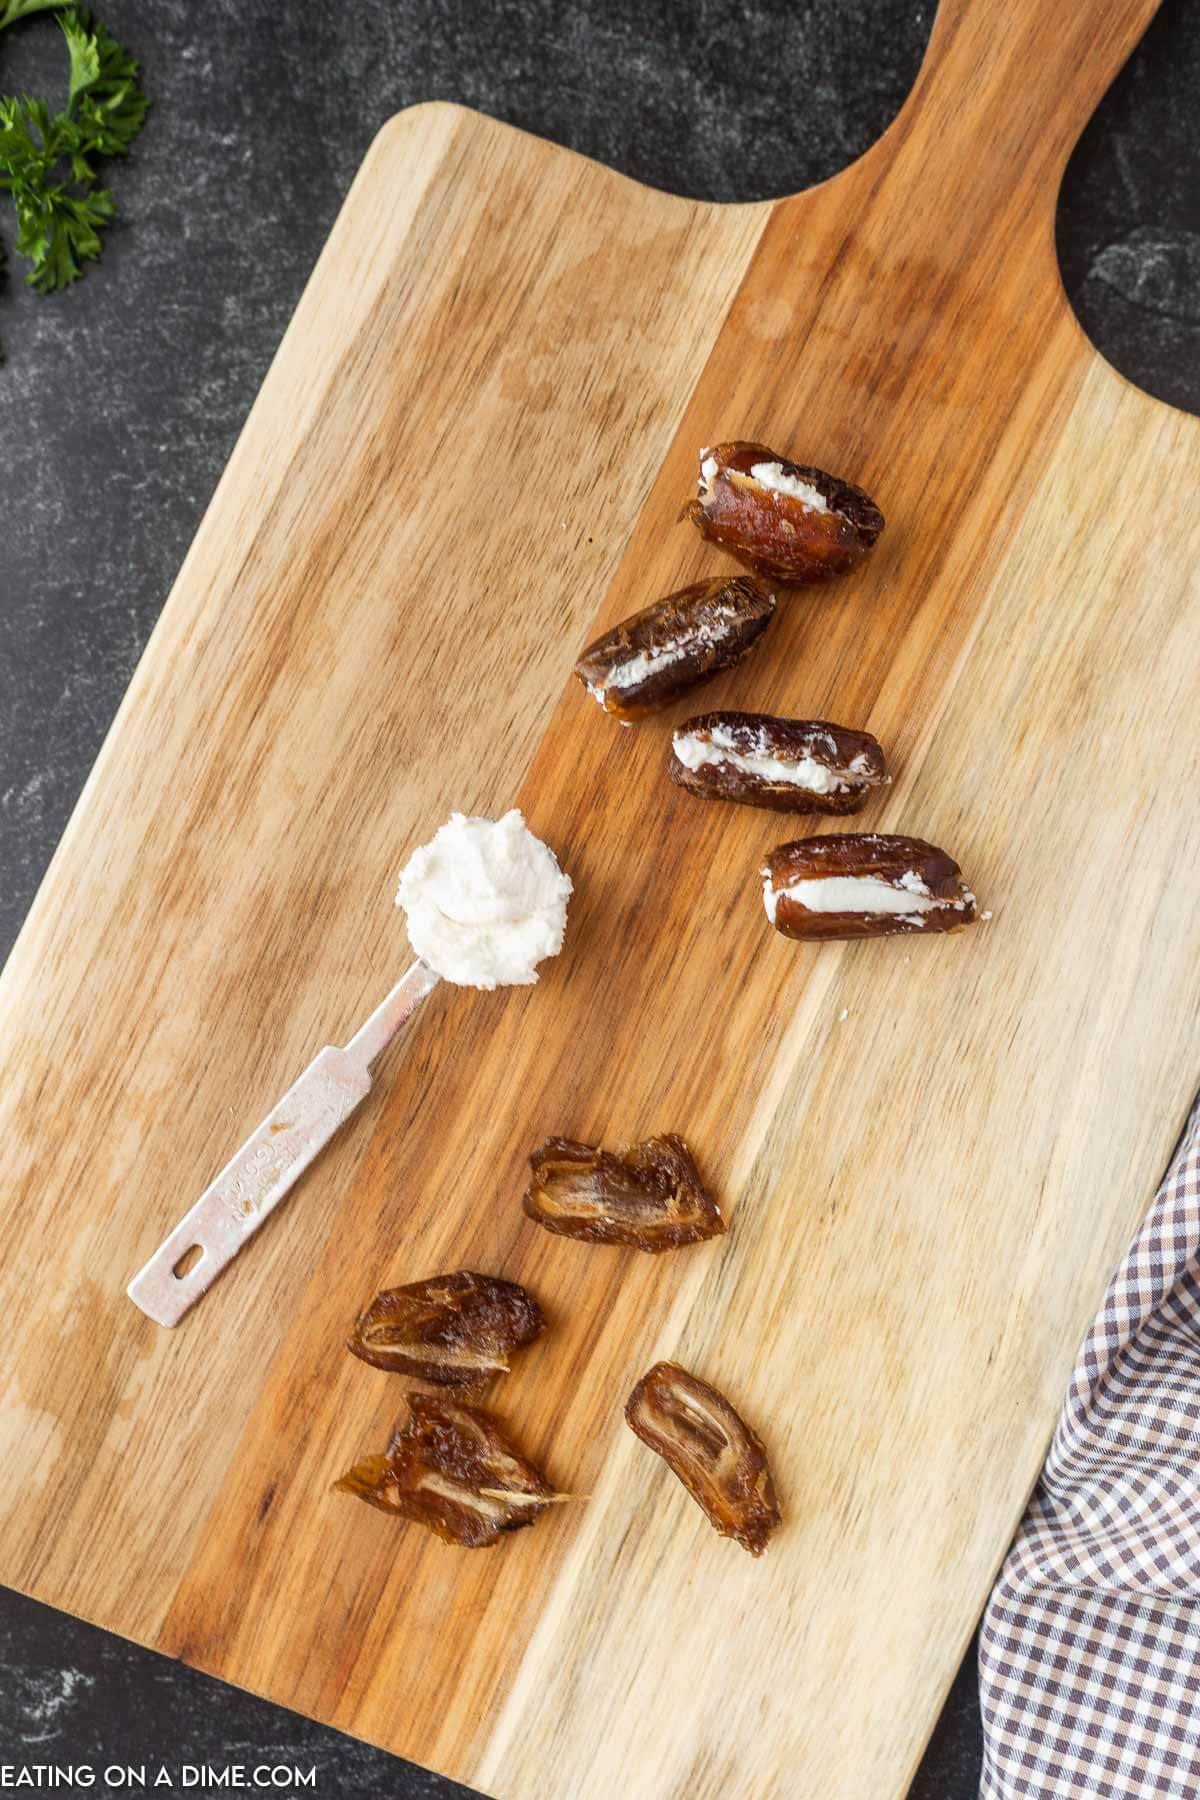 Stuffing the pitted dates with goat cheese